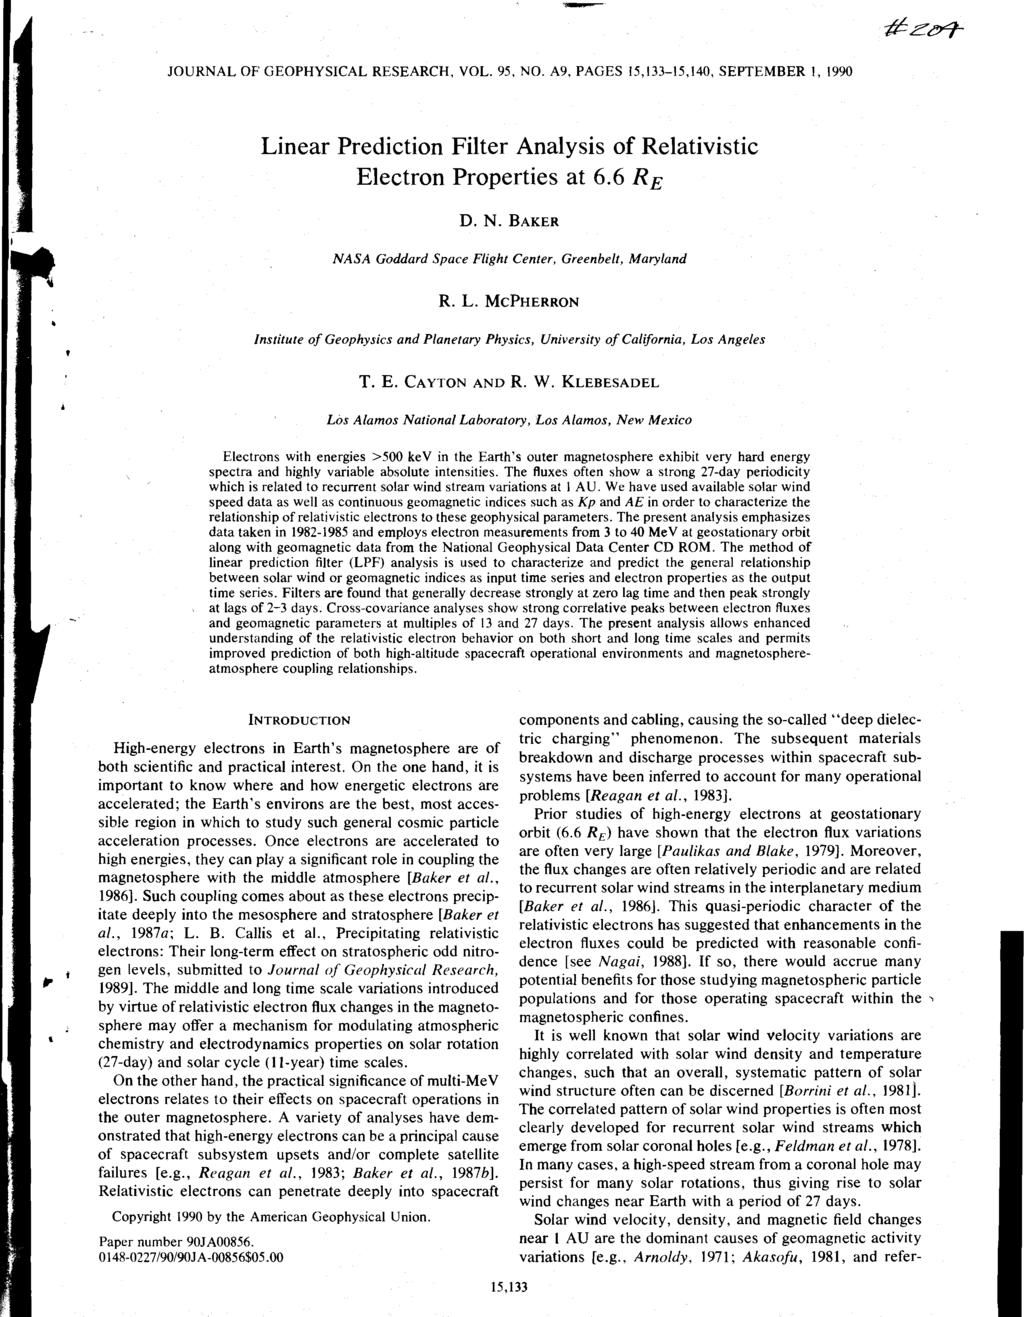 JOURNAL OF GEOPHYSICAL RESEARCH, VOL. 95, NO. A9, PAGES 15,133-15,140, SEPTEMBER I, 1990 Linear Prediction Filter Analysis of Relativistic Electron Properties at 6.6 R E D. N. BAKER NASA Goddard Space Flight Center, Greenbelt, Maryland R.